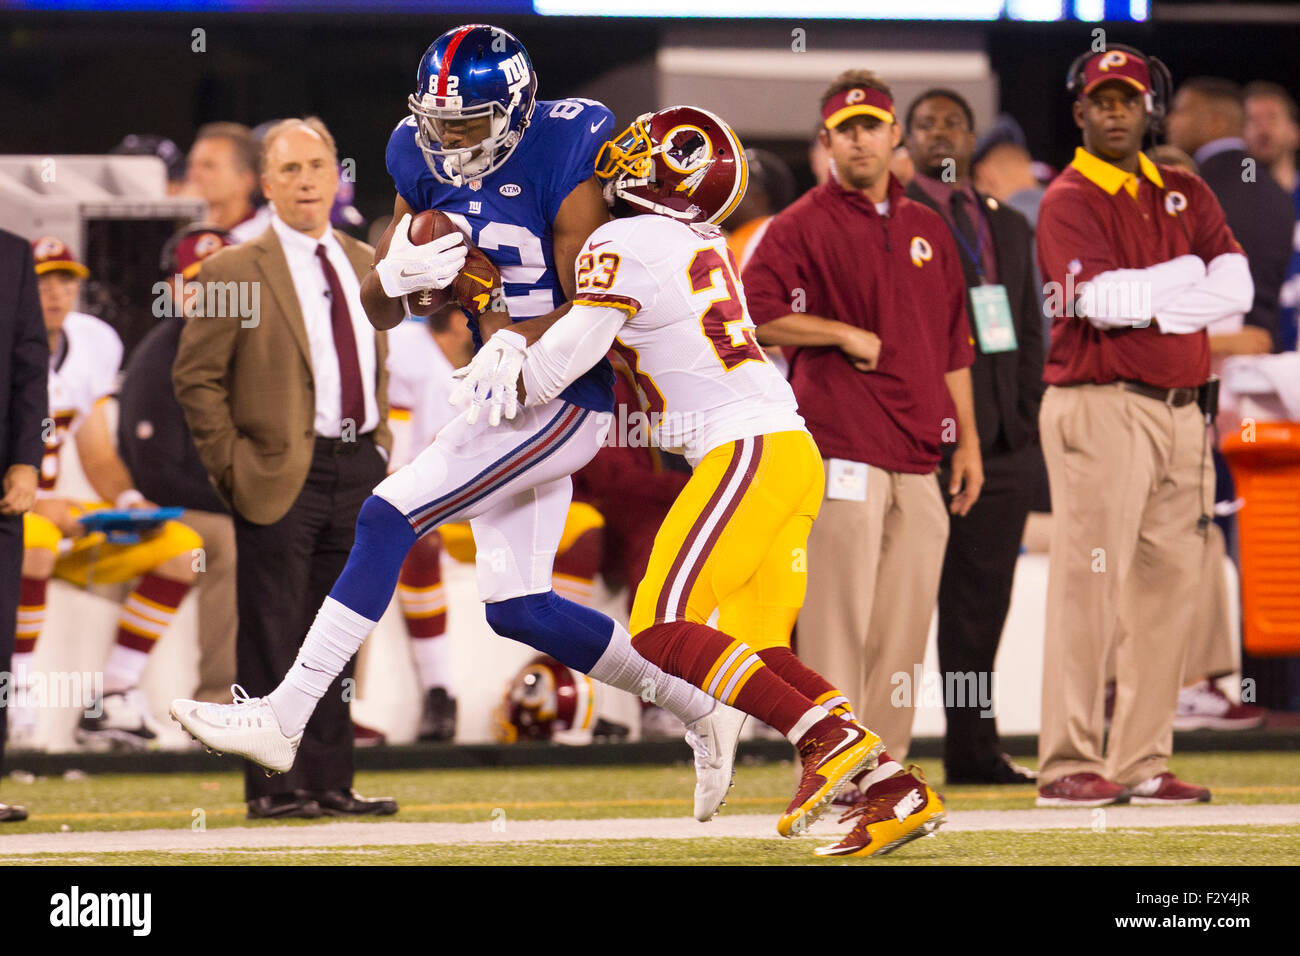 September 24, 2015, New York Giants wide receiver Rueben Randle (82)in action against Washington Redskins cornerback DeAngelo Hall (23) during the NFL game between the Washington Redskins and the New York Giants at MetLife Stadium in East Rutherford, New Jersey. The New York Giants won 32-21. Christopher Szagola/CSM Stock Photo